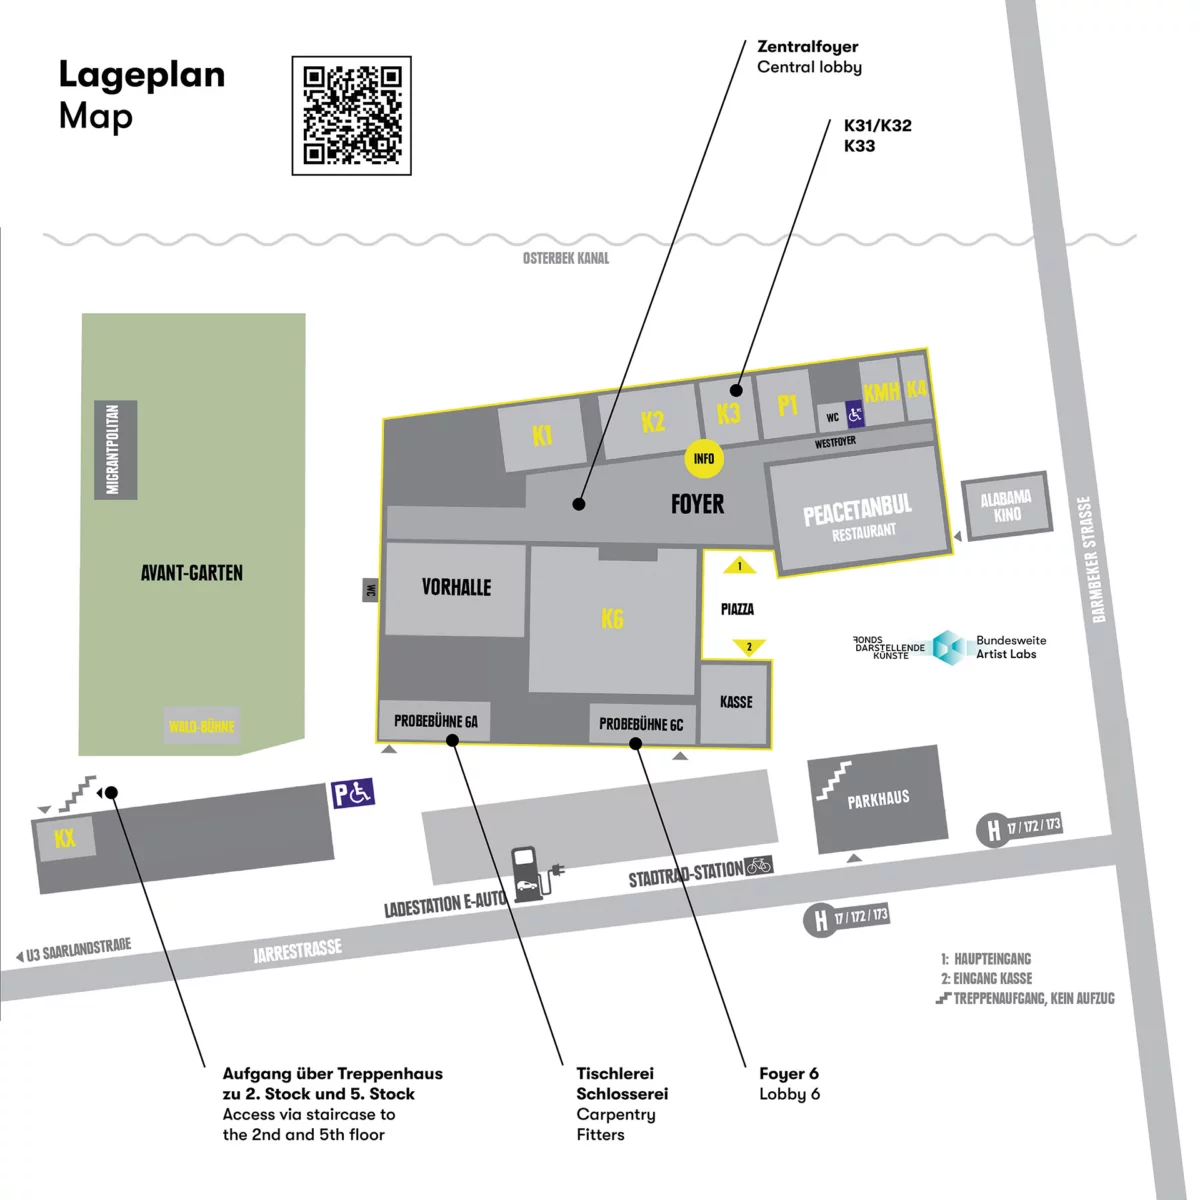 Schematic drawing of the grounds and rooms of Kampnagel. In the central foyer you can find the information booth and the registration.